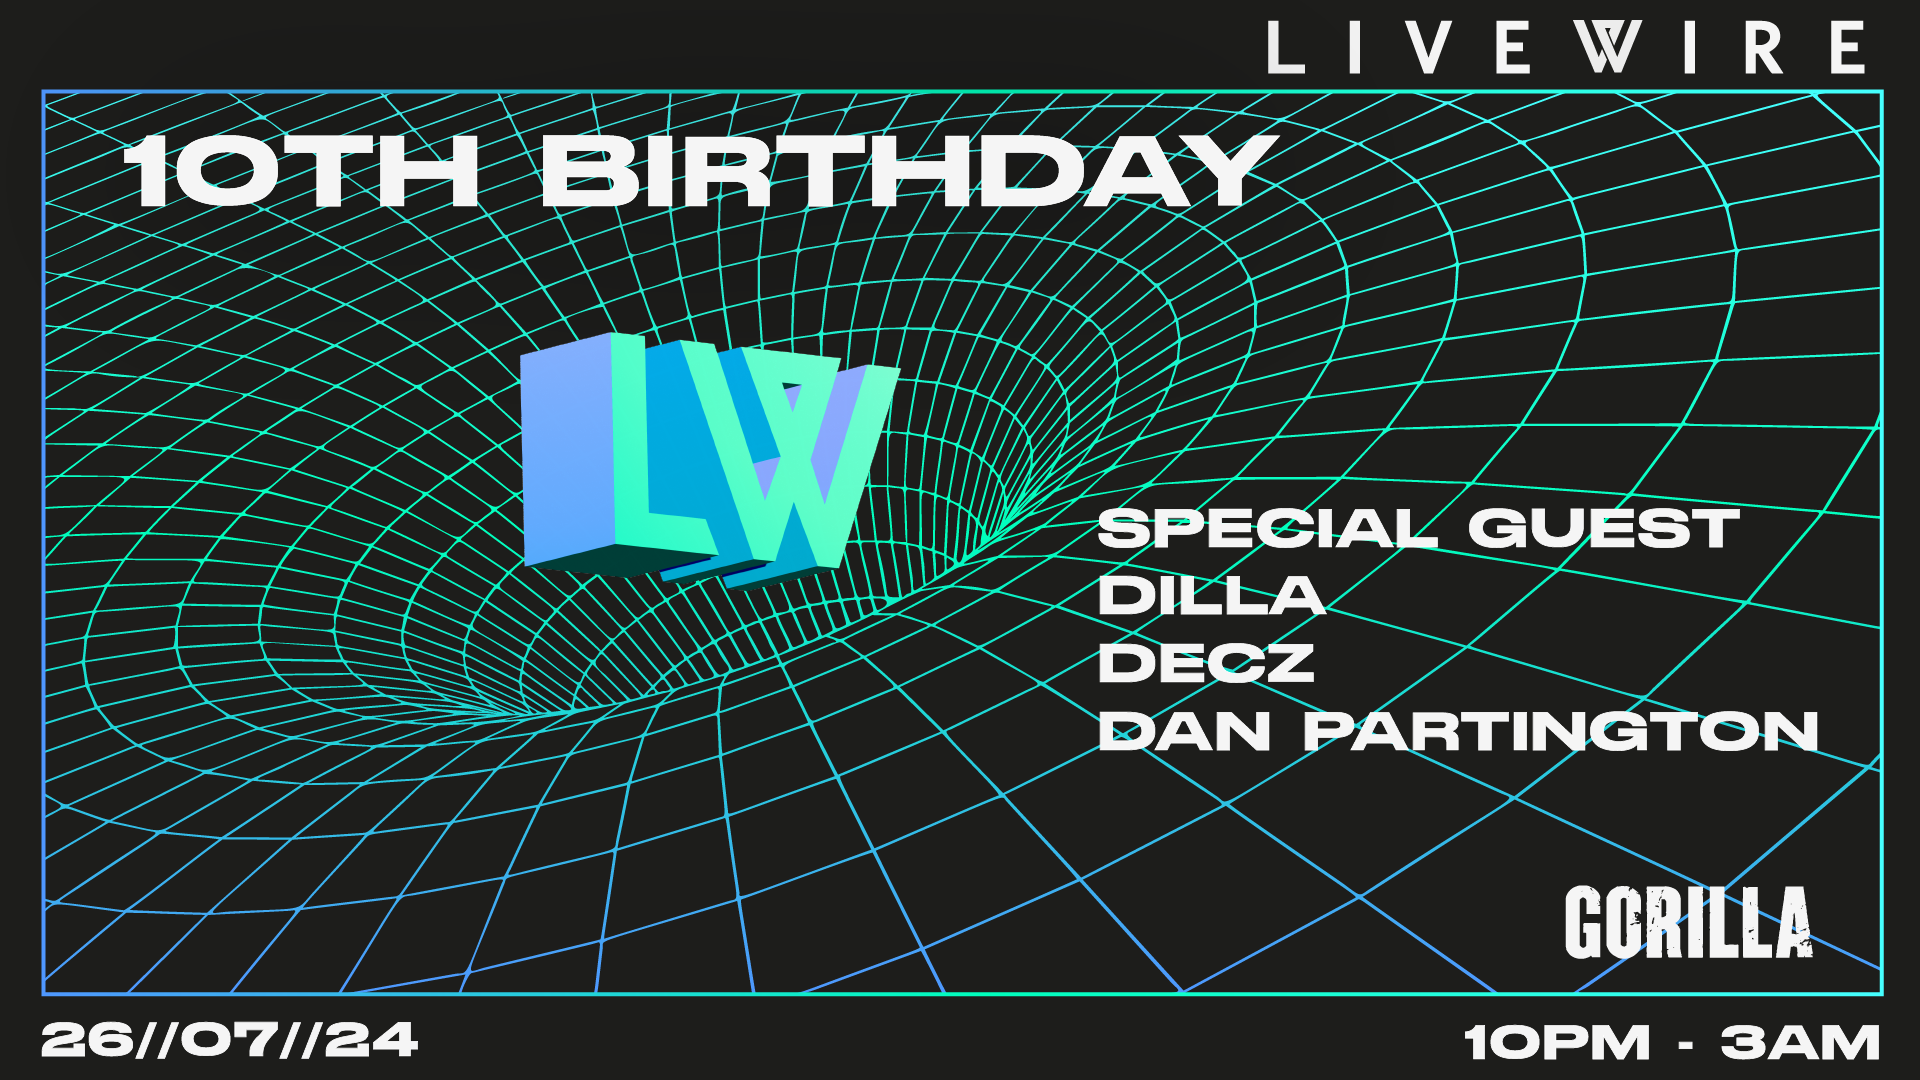 Live Wire Events: 10th Birthday Party